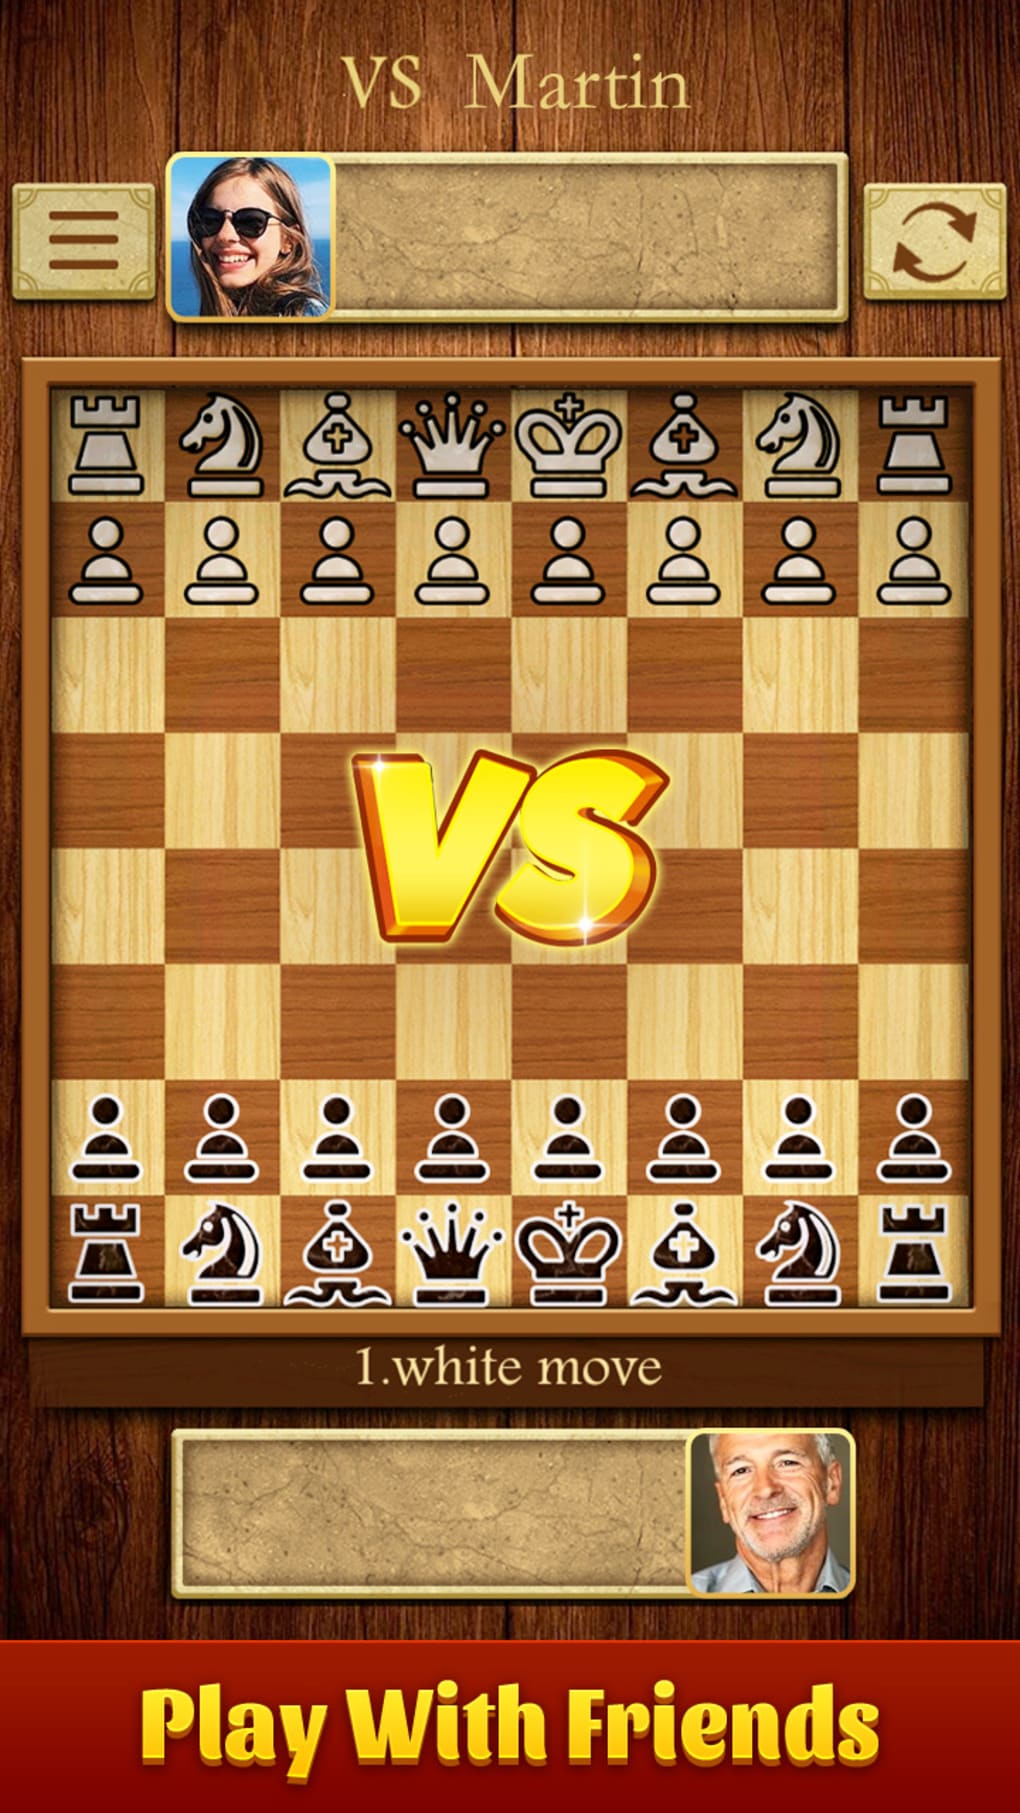 Chessmaster Game - Chess Terms -  